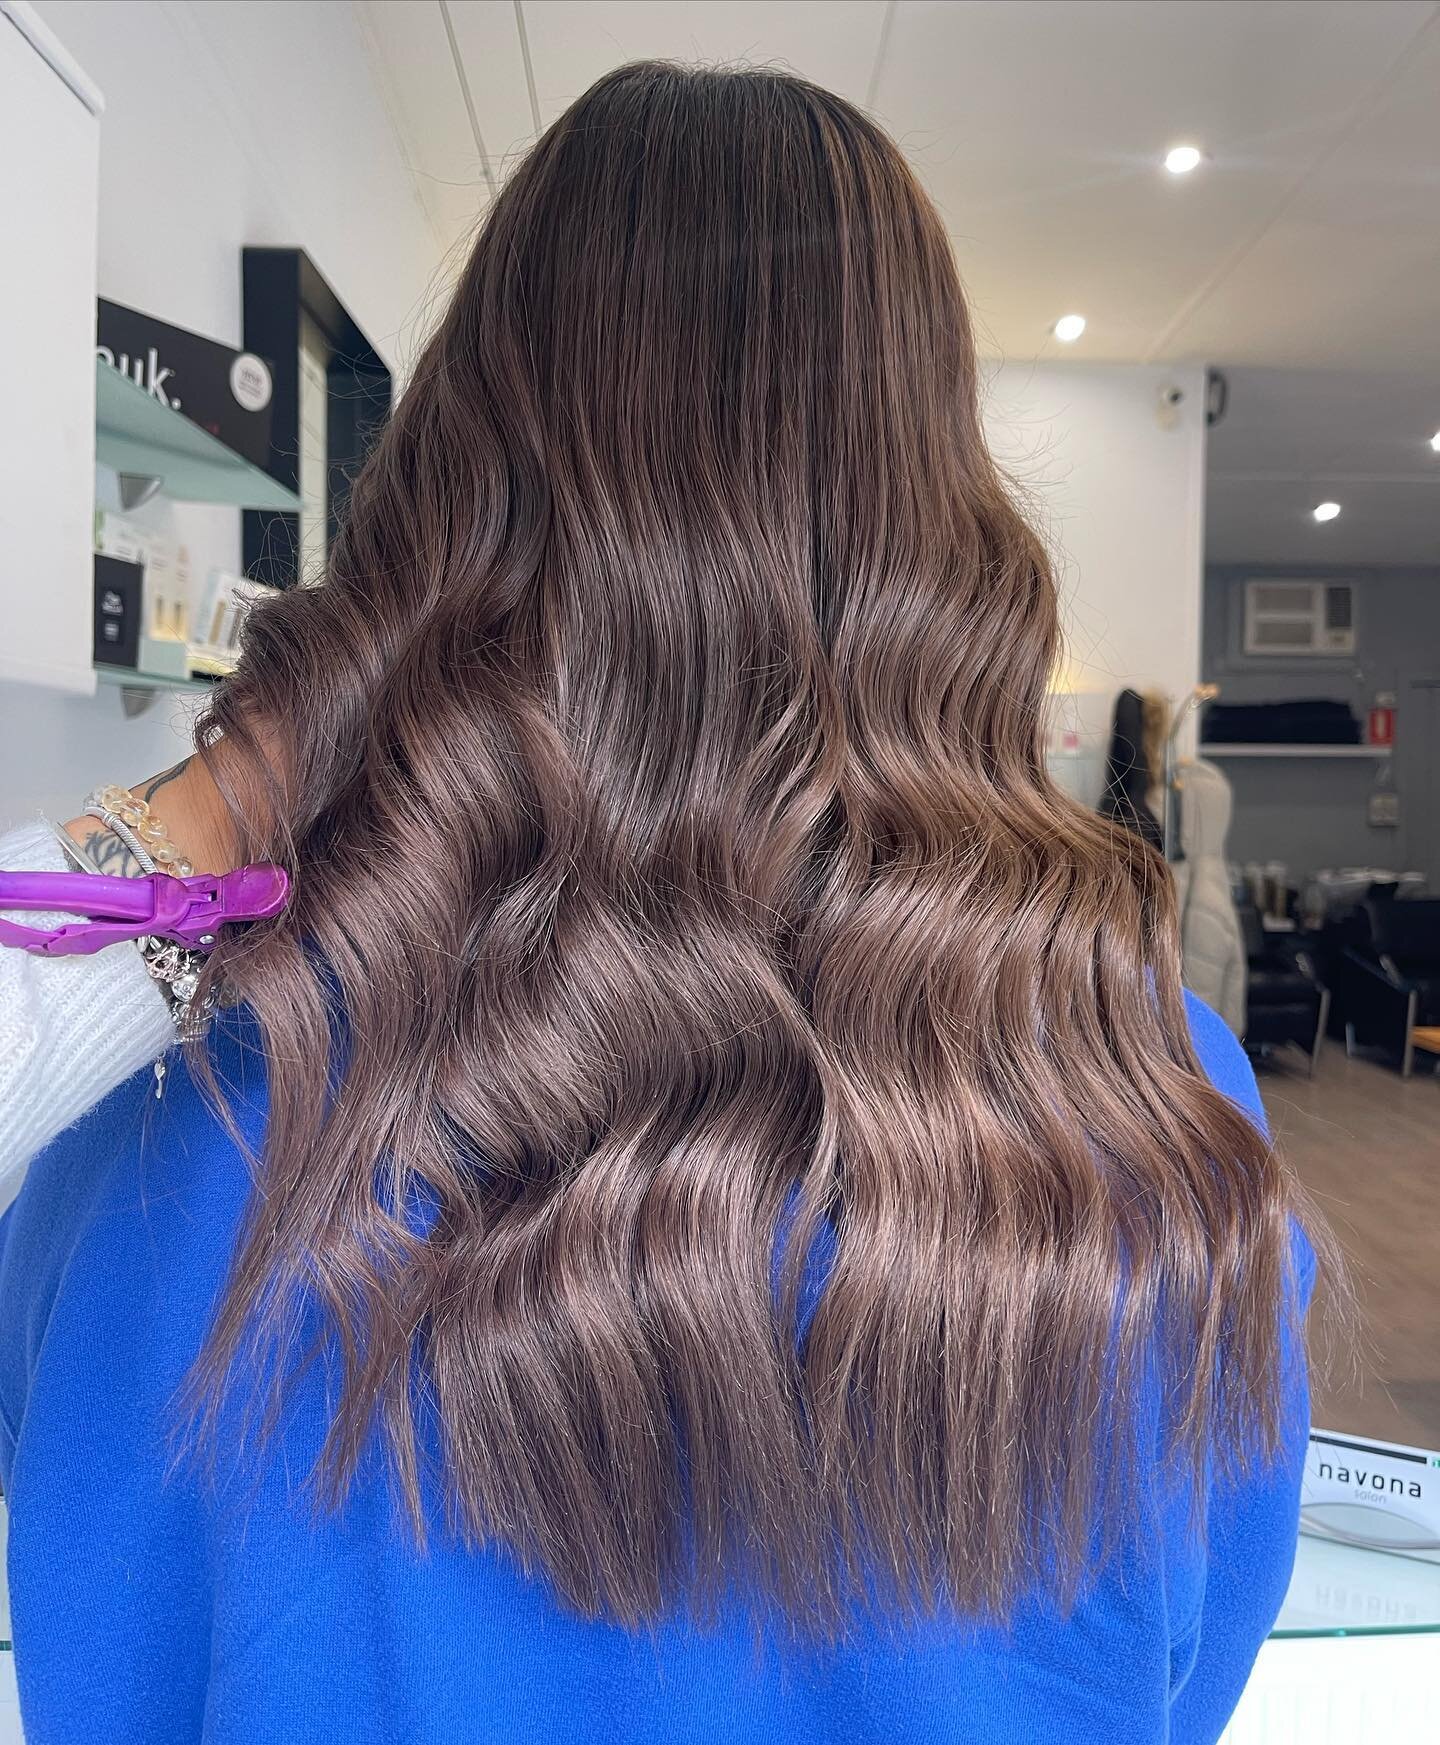 Darcy creating this subtle highlights on beautiful brown hair.  #wella #wellahair #wellaprofessional #wellacolor